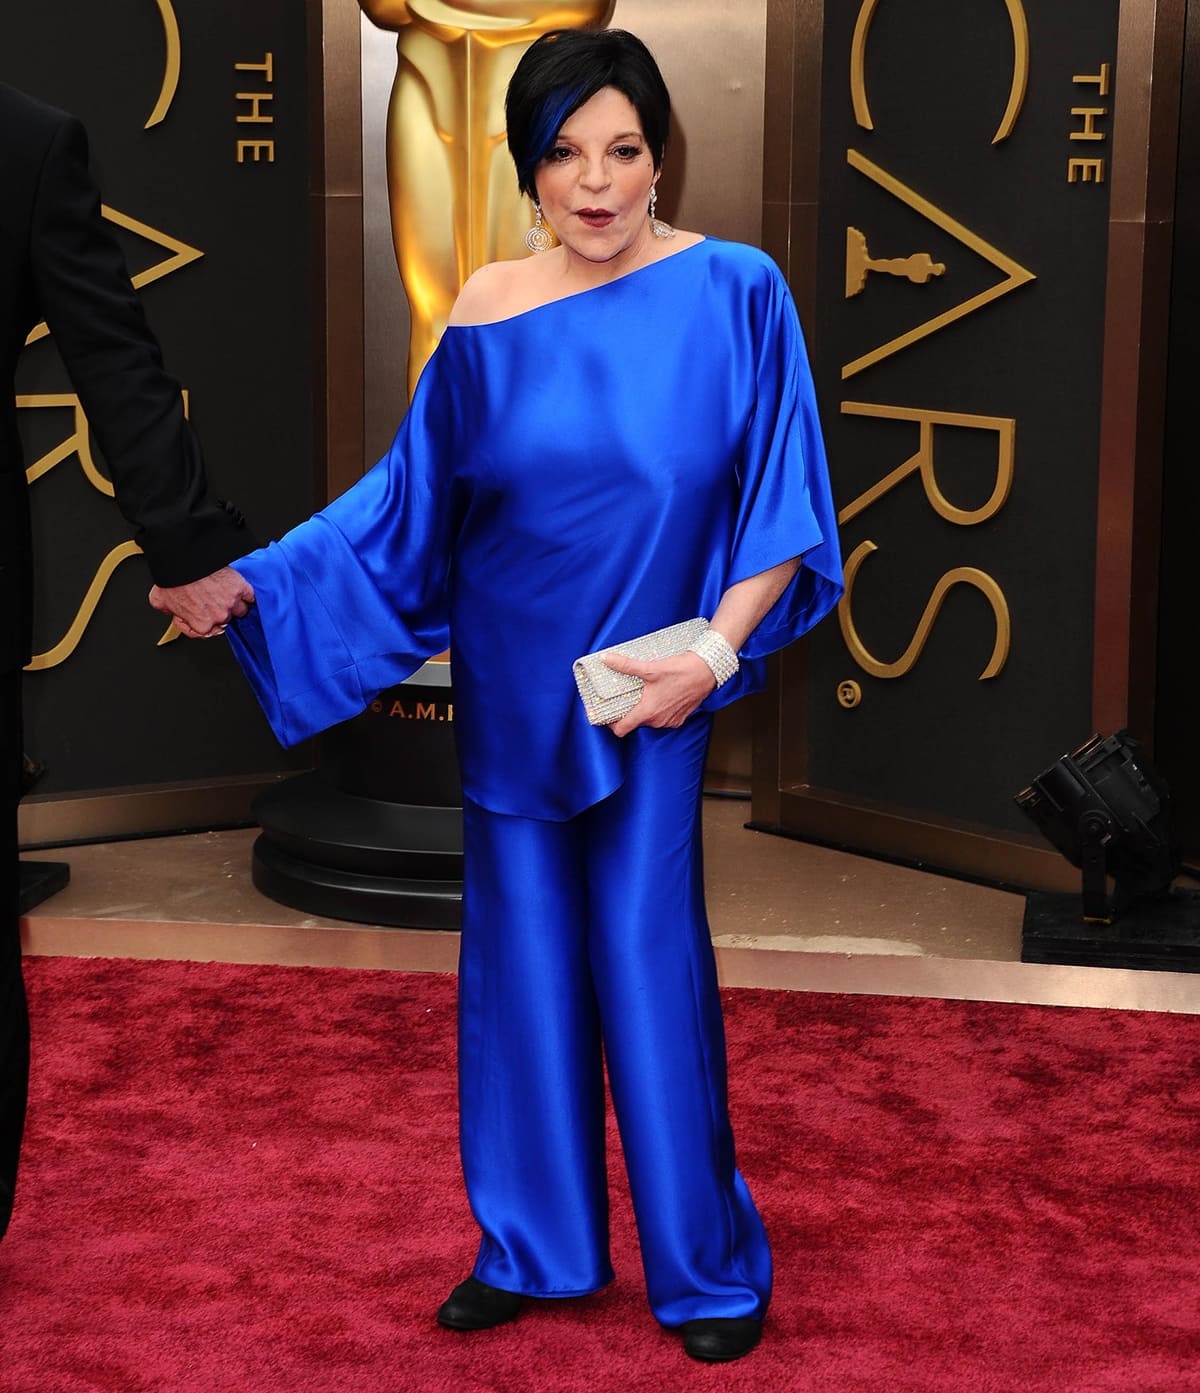 Actress Liza Minnelli in an electric blue pantsuit at the Oscars held at Hollywood & Highland Center